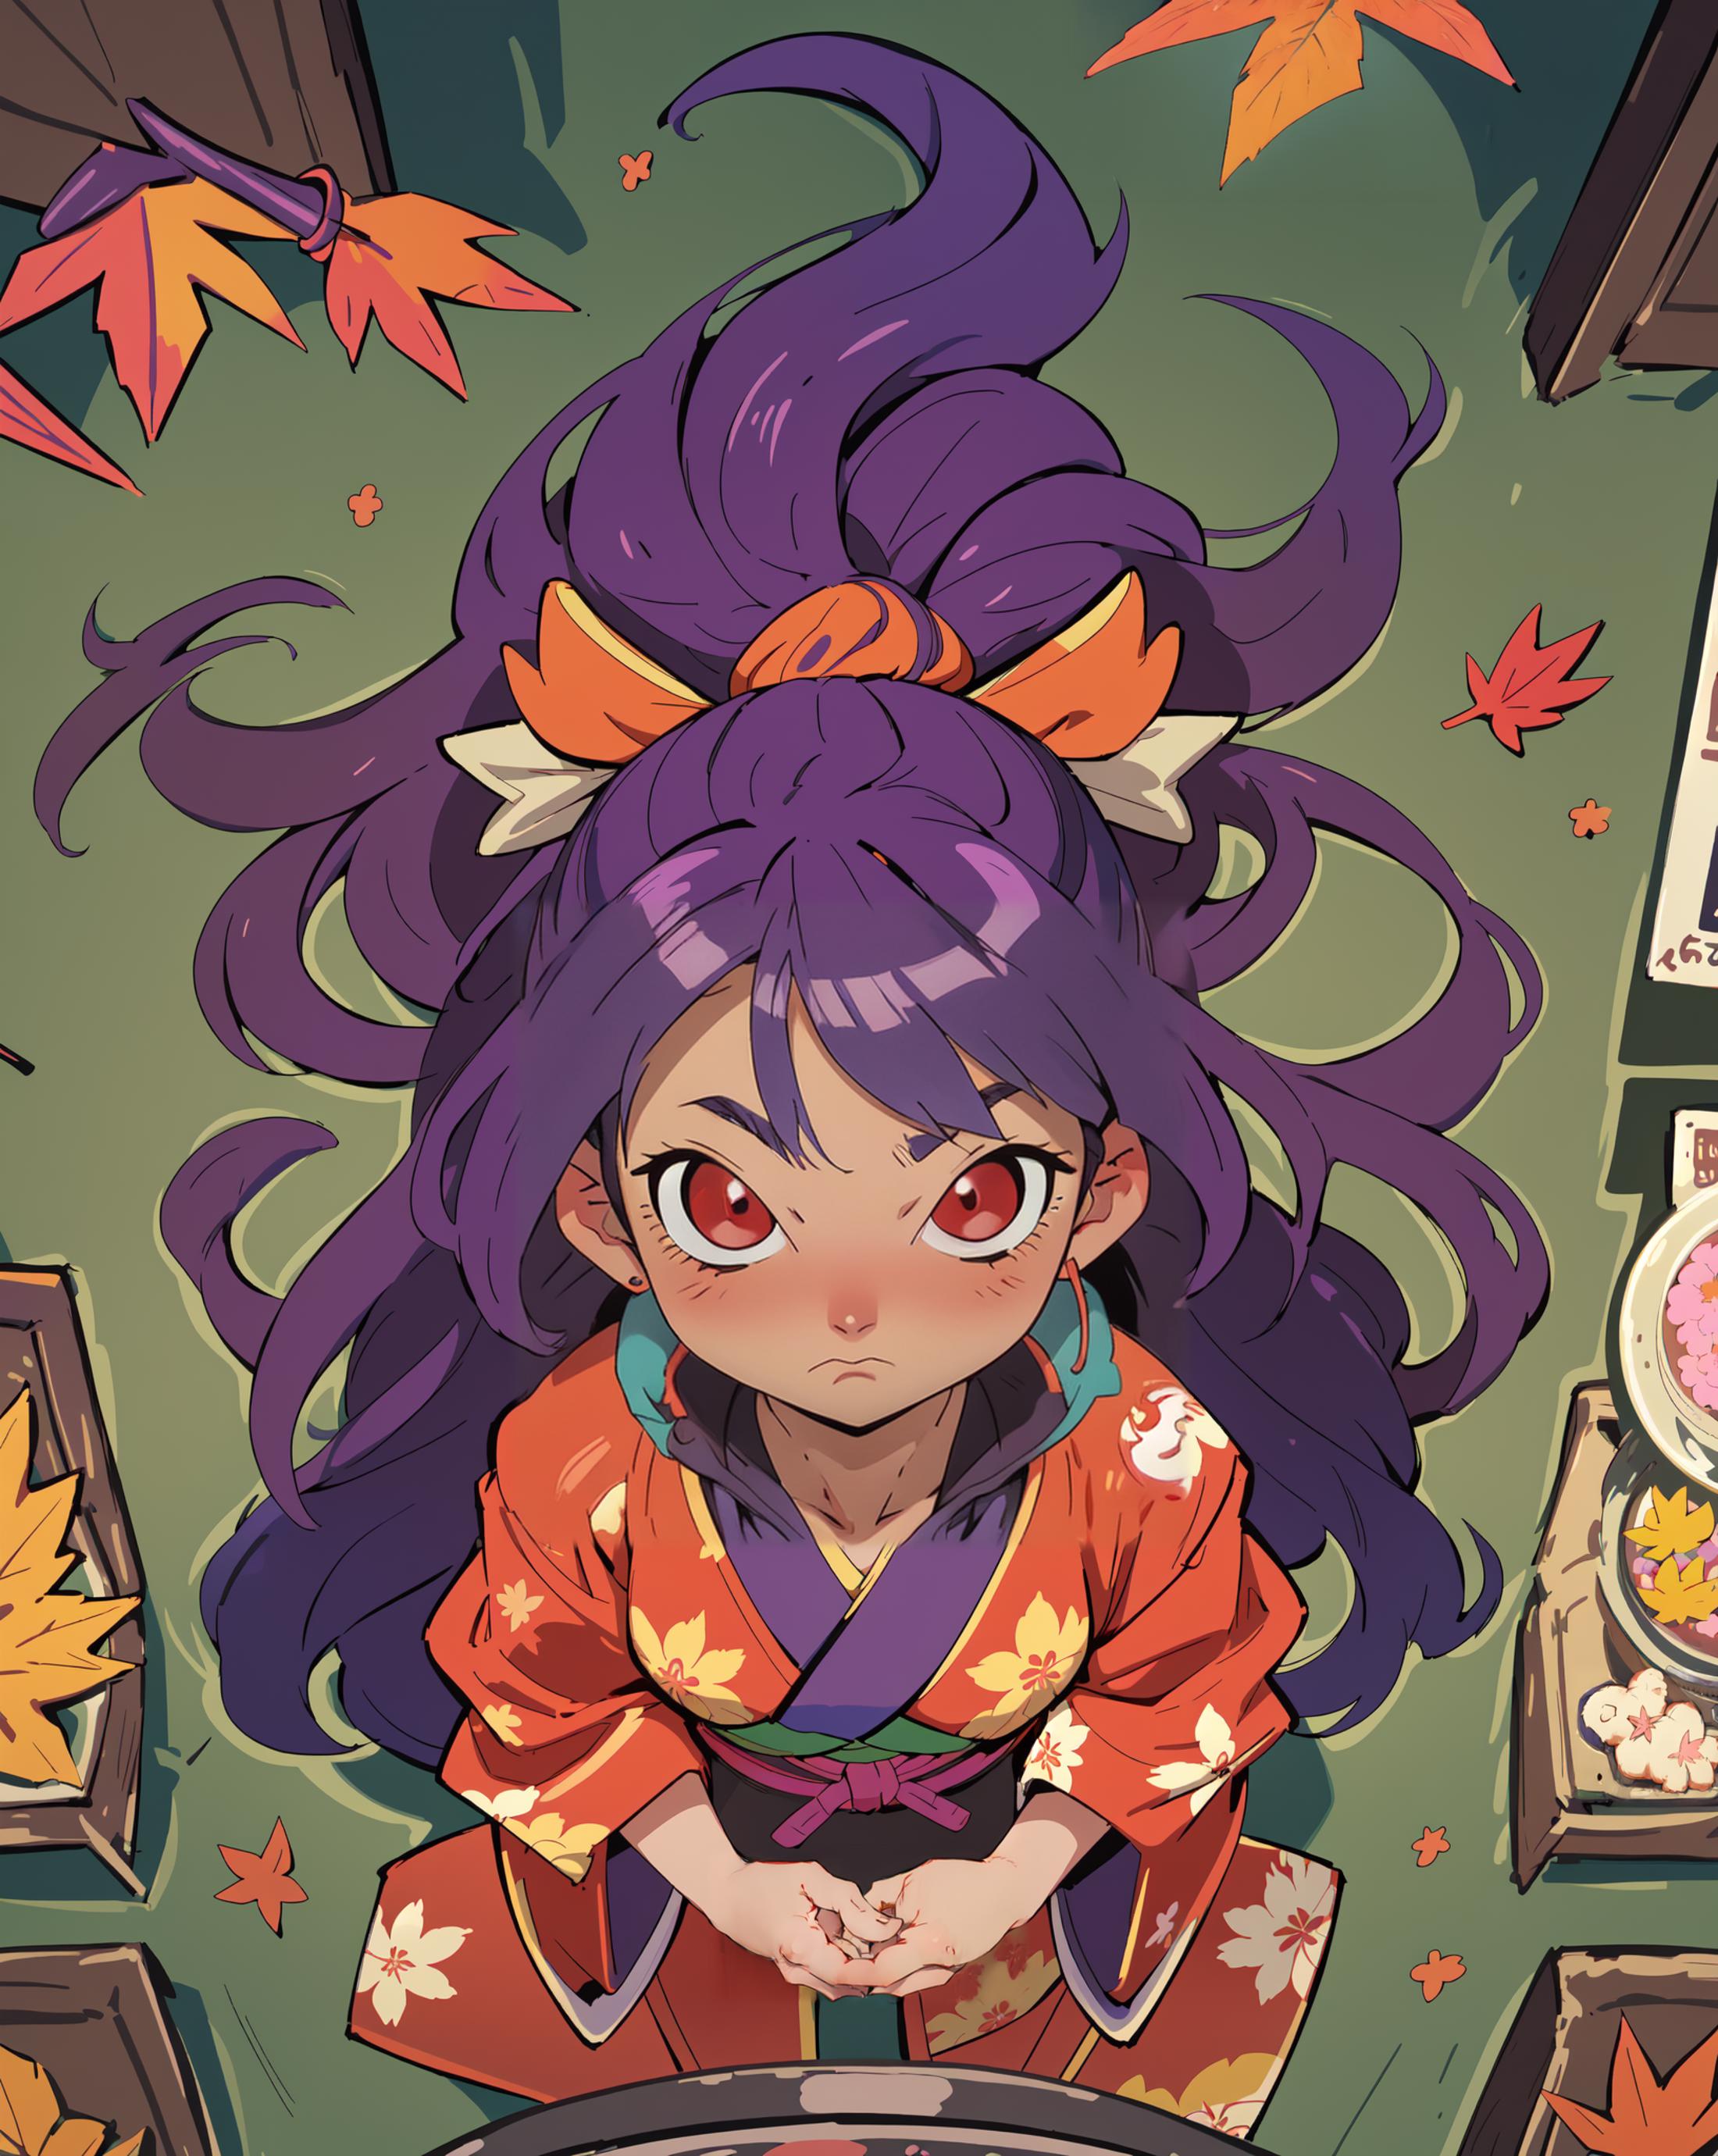 A purple-haired girl wearing an orange bow is sitting on the floor.